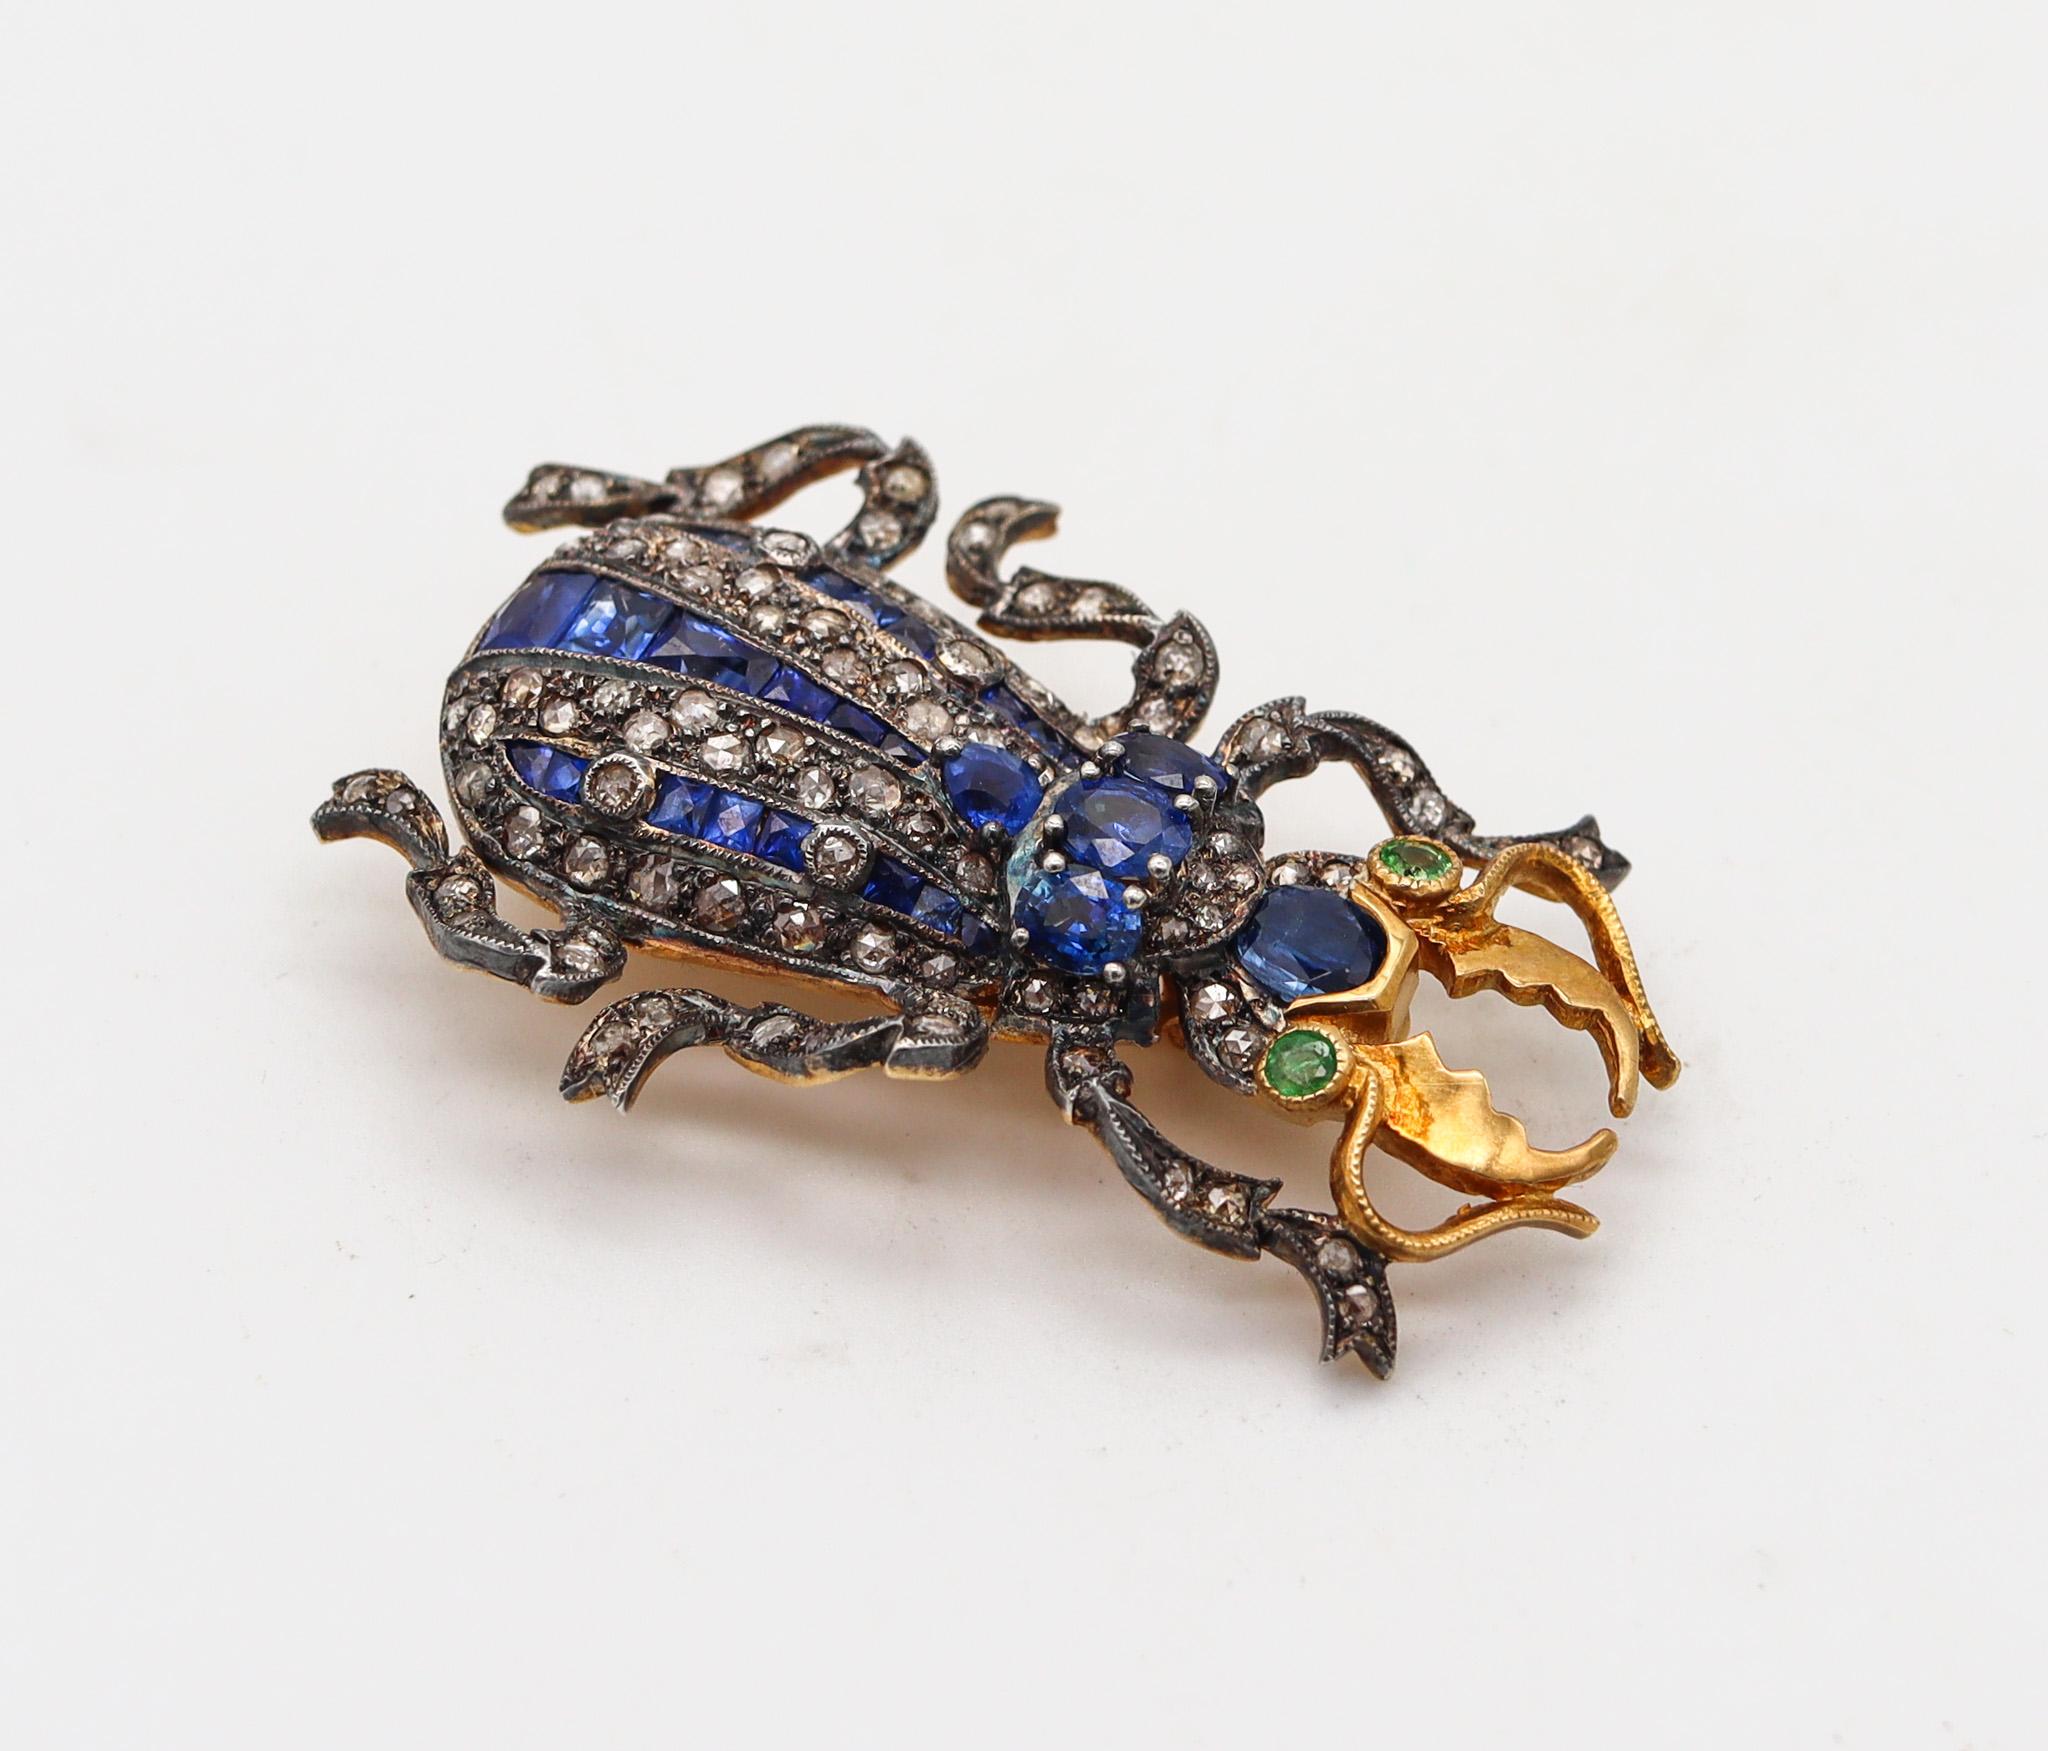 An Edwardian scarab pendant-brooch made in Austria.

Very handsome and well realized convertible pendant-brooch, created in the Austrian Hungarian Empire, back in the 1900. It was designed in the shape of a scarab in three dimensions, carefully